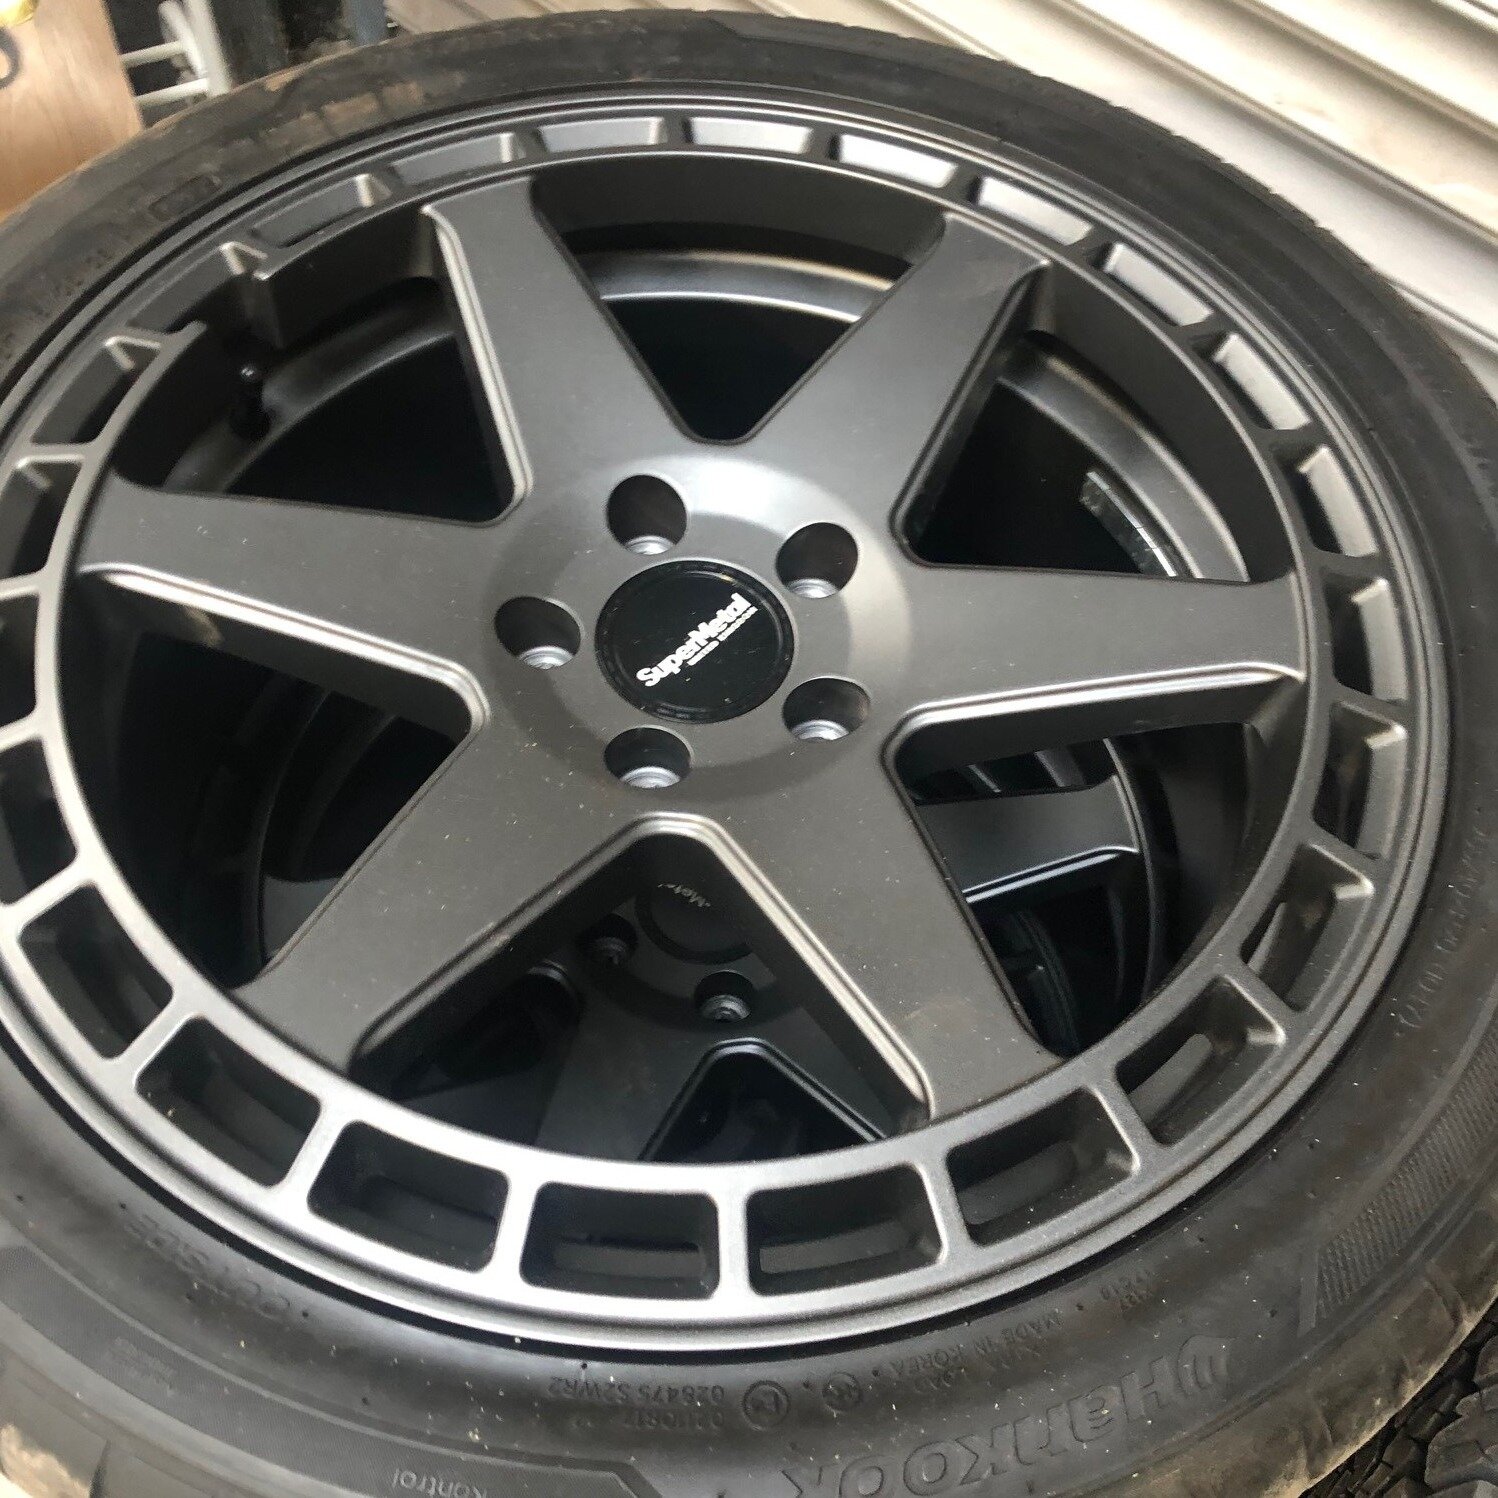 Wheel Wheel Wheels.........

Can't decide which wheels to order when searching online?
Not sure which wheels will fit your van?
No idea what tyres you should be rolling on?

Simply Surf bus are hear to help you make the right choice when it comes to 